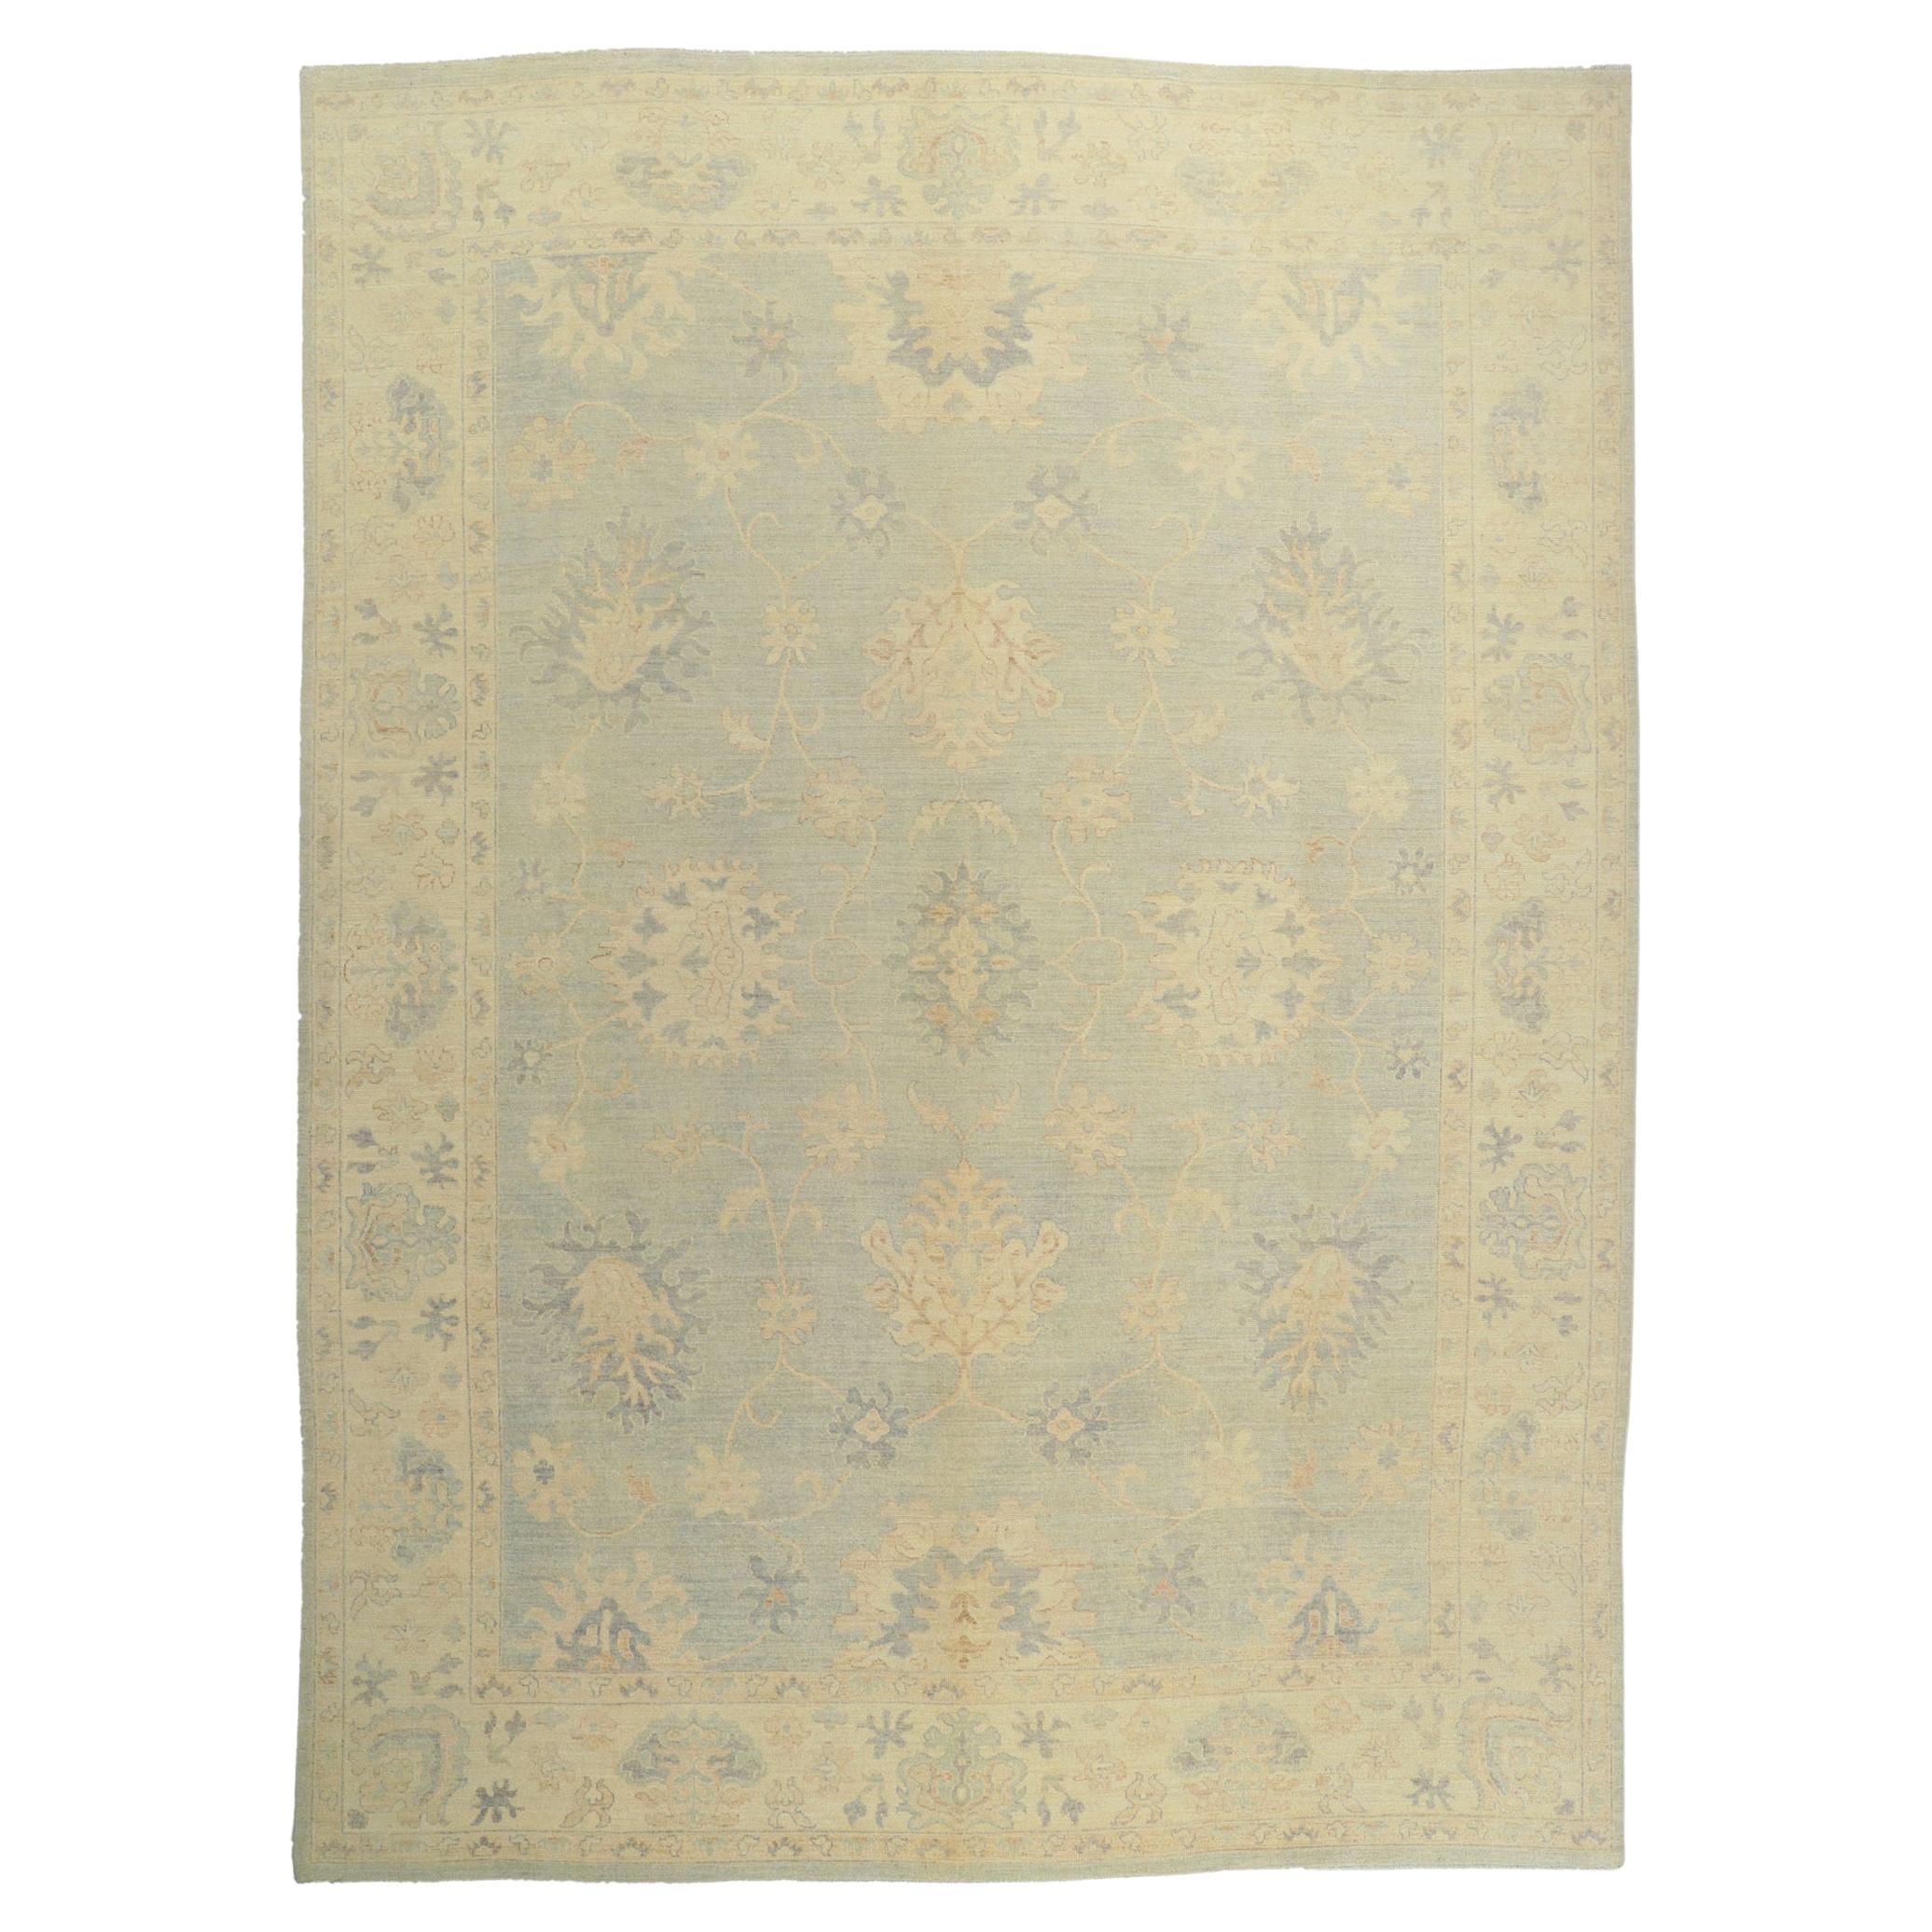 New Vintage-Inspired Oushak Rug with Light and Airy Color Palette